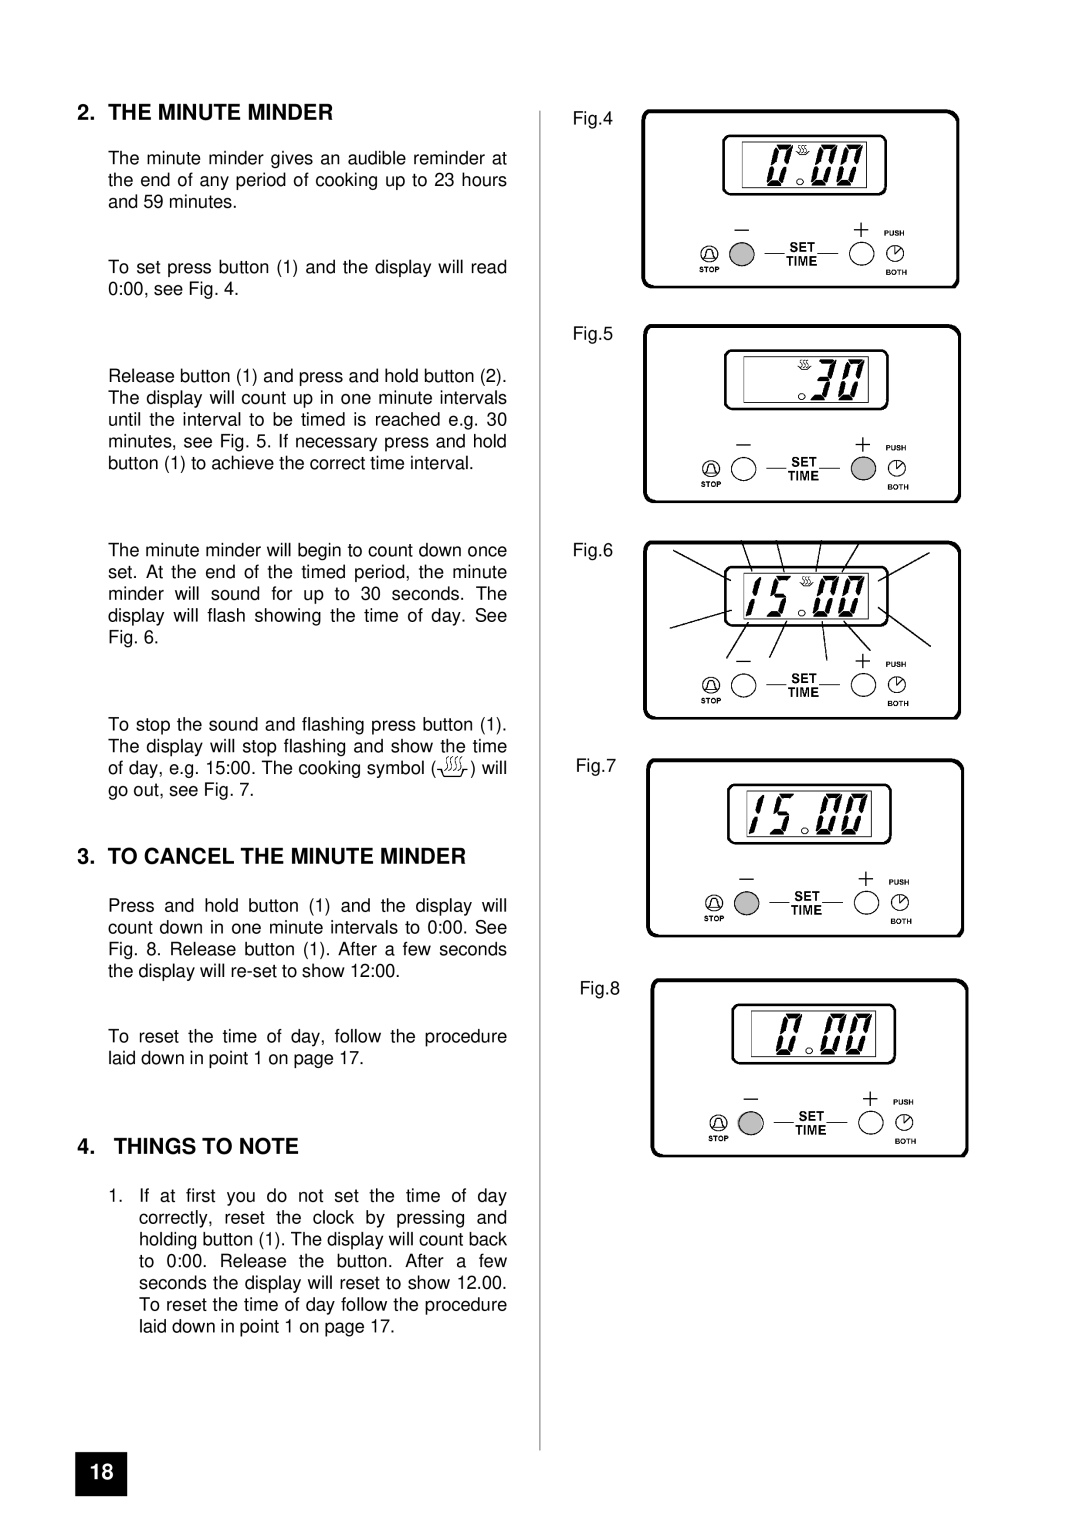 Moffat MD 900 B/W installation instructions To Cancel the Minute Minder, Things to Note 